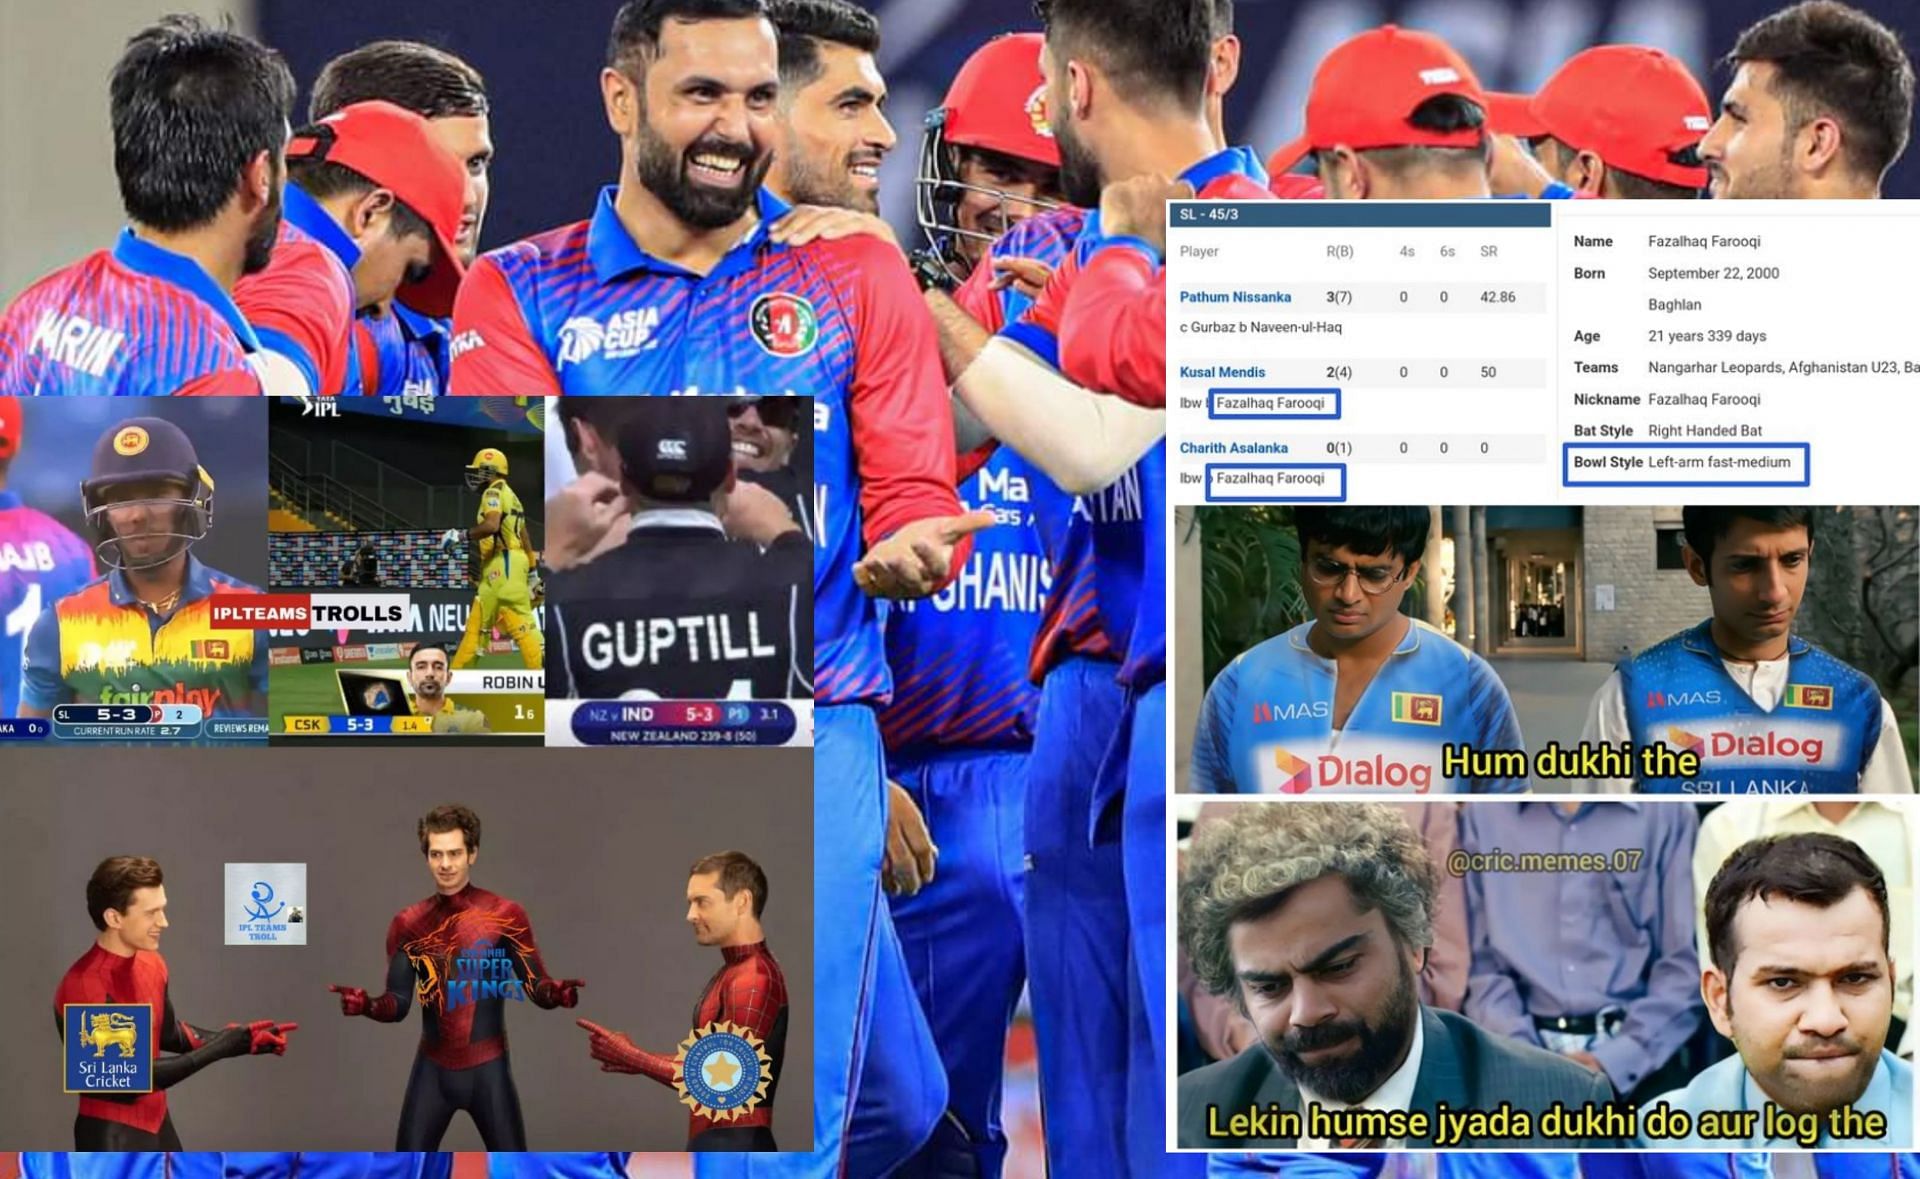 Fans took to social media to share memes after Sri Lanka lost against Afghanistan on Saturday